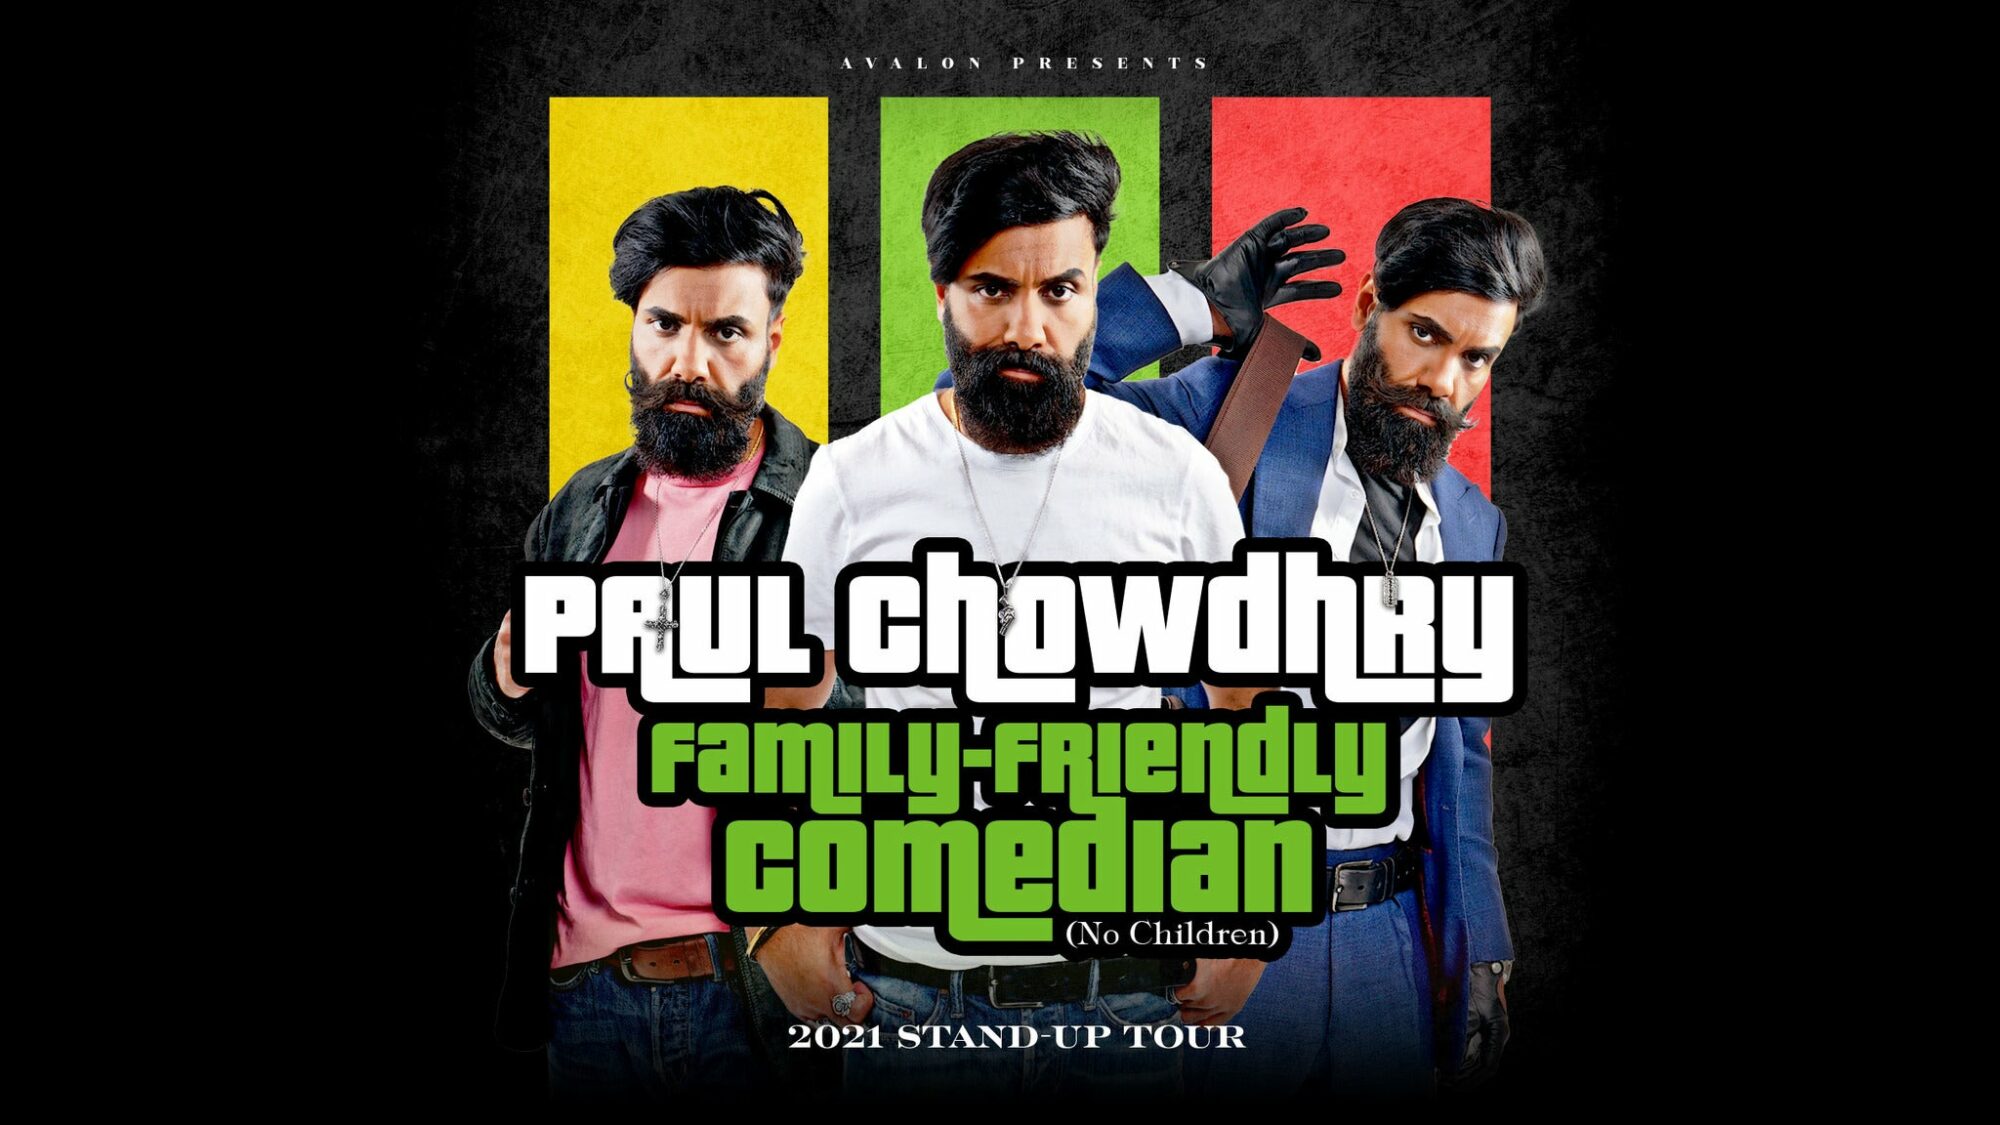 Image name Paul Chowdhry Family Friendly Comedian at St Georges Hall Bradford Bradford the 27 image from the post Events in Yorkshire.com.